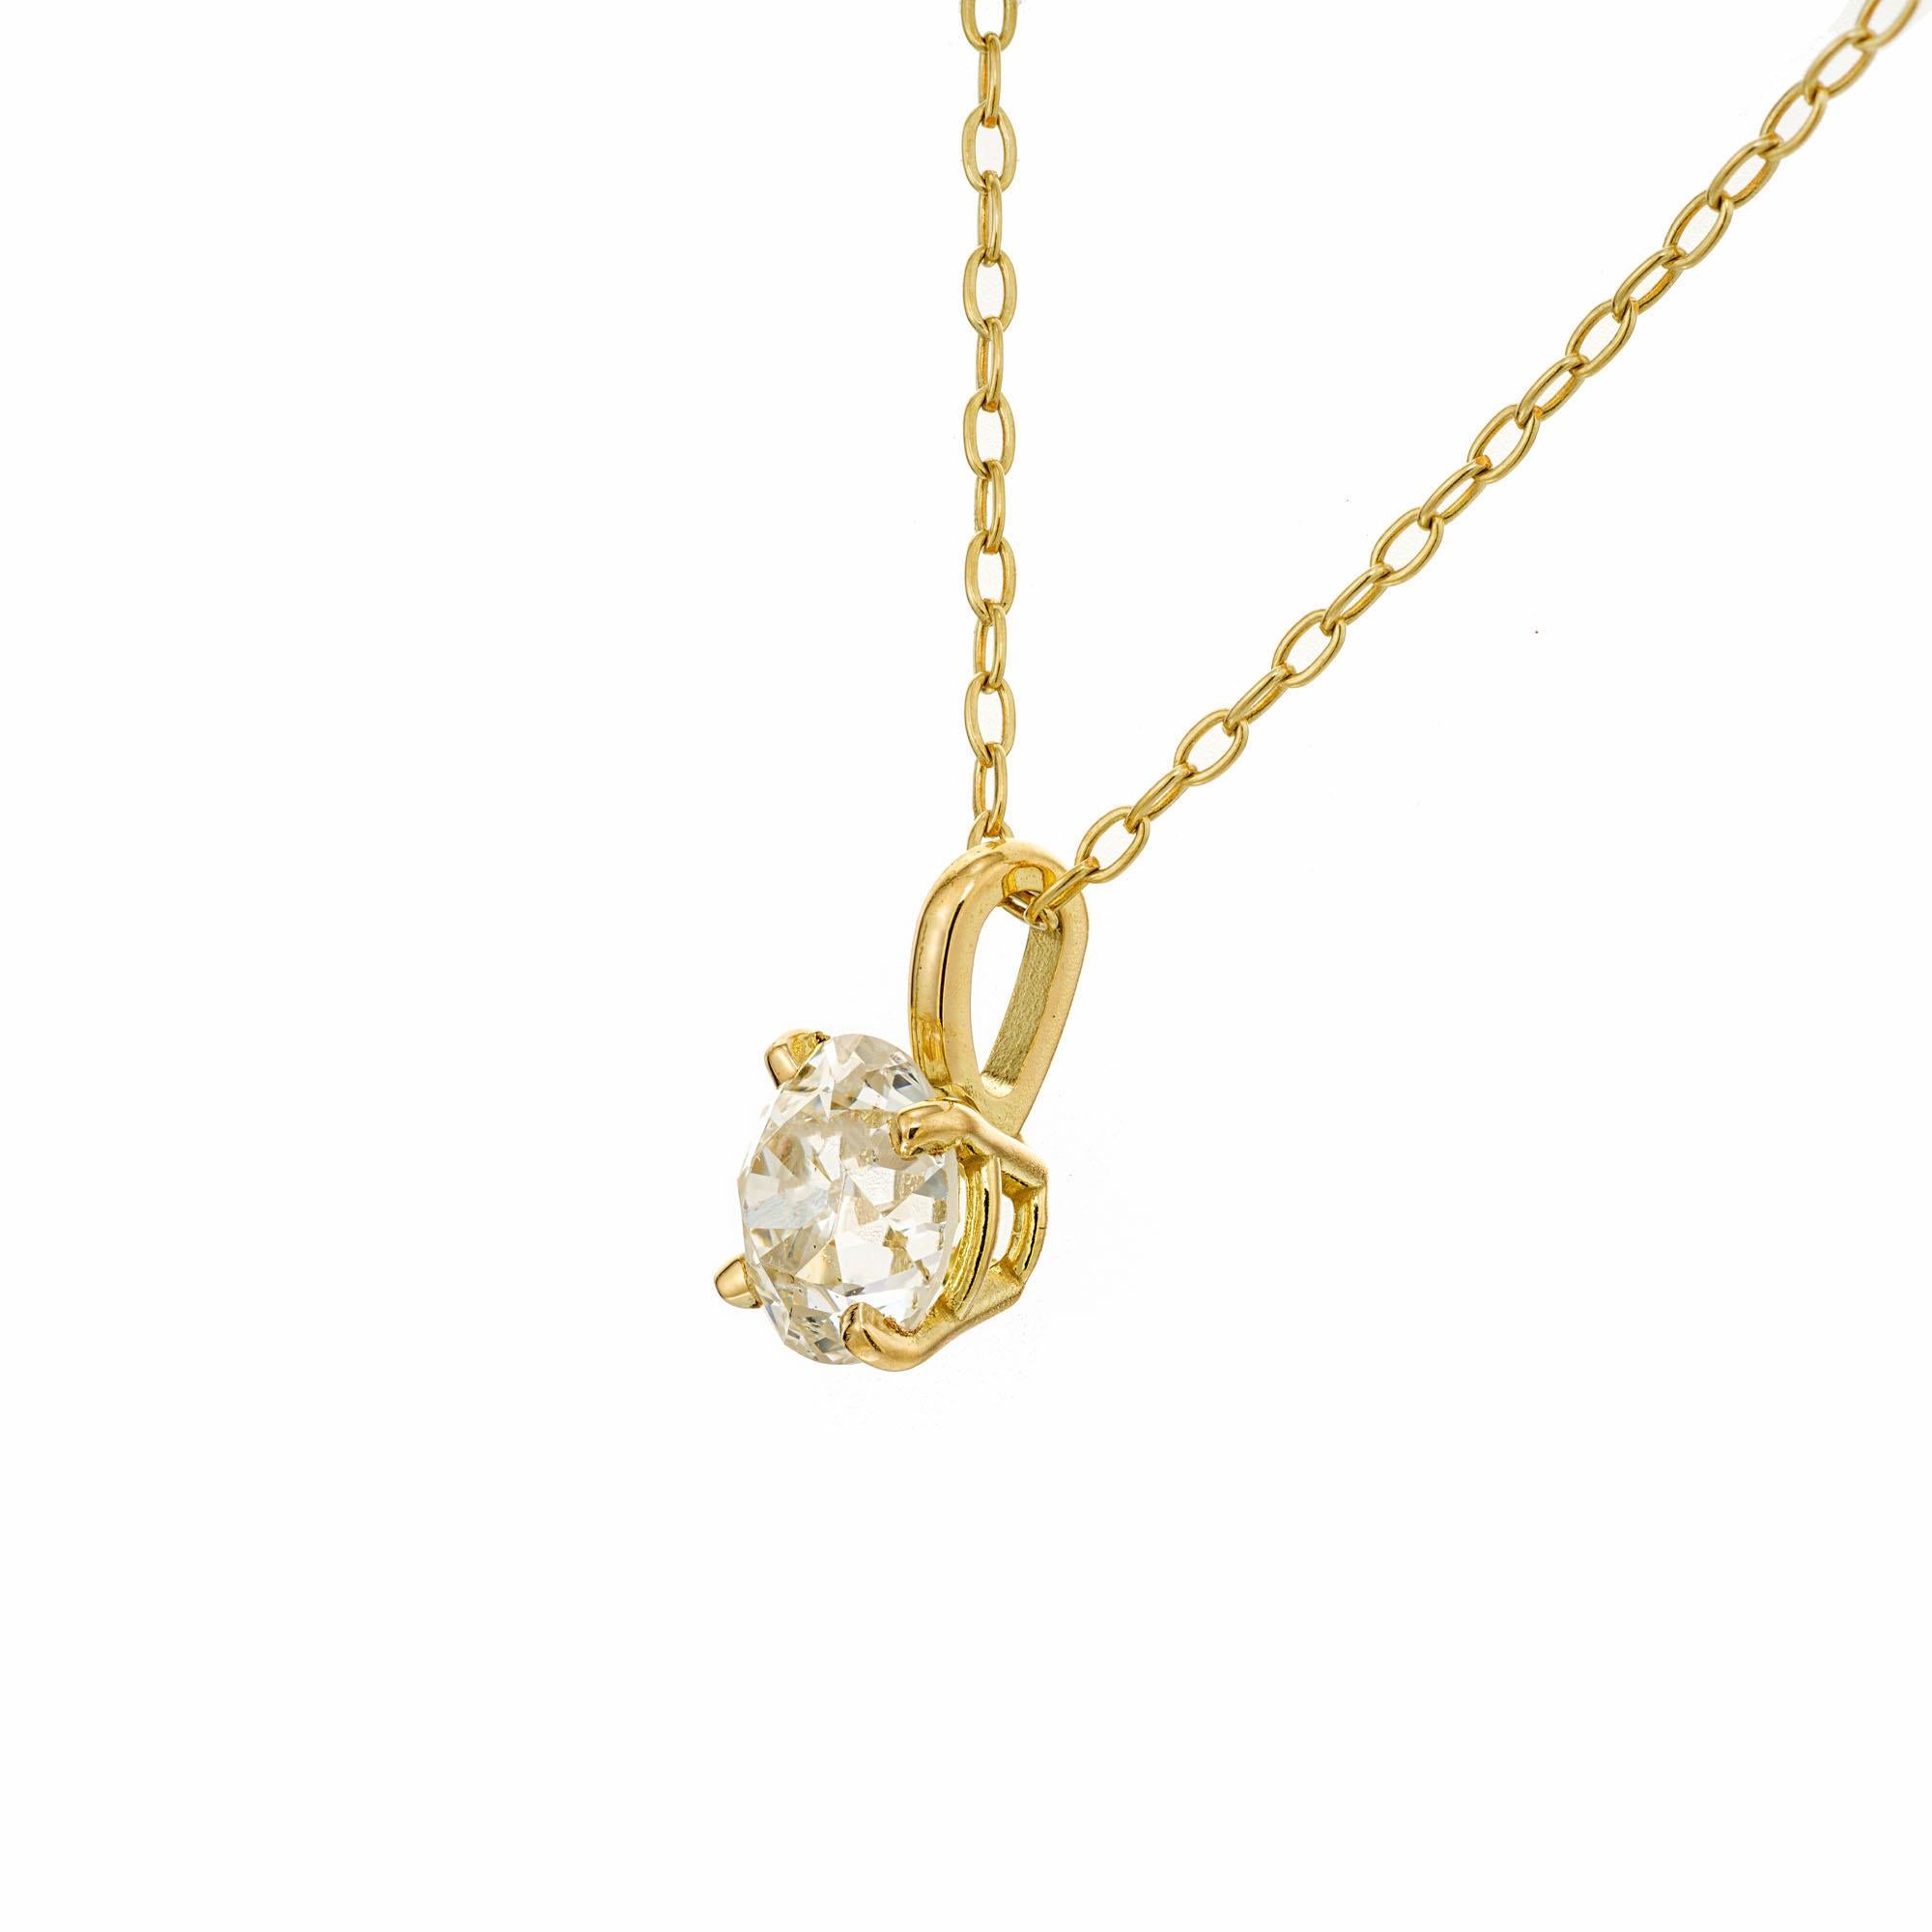 Diamond pendant necklace. GIA certified circular brilliant Old European cut diamond with lots of sparkle in a 18k yellow gold basket setting. Designed and crafted in the Peter Suchy workshop

1 circular brilliant cut old European cut diamond, J SI2